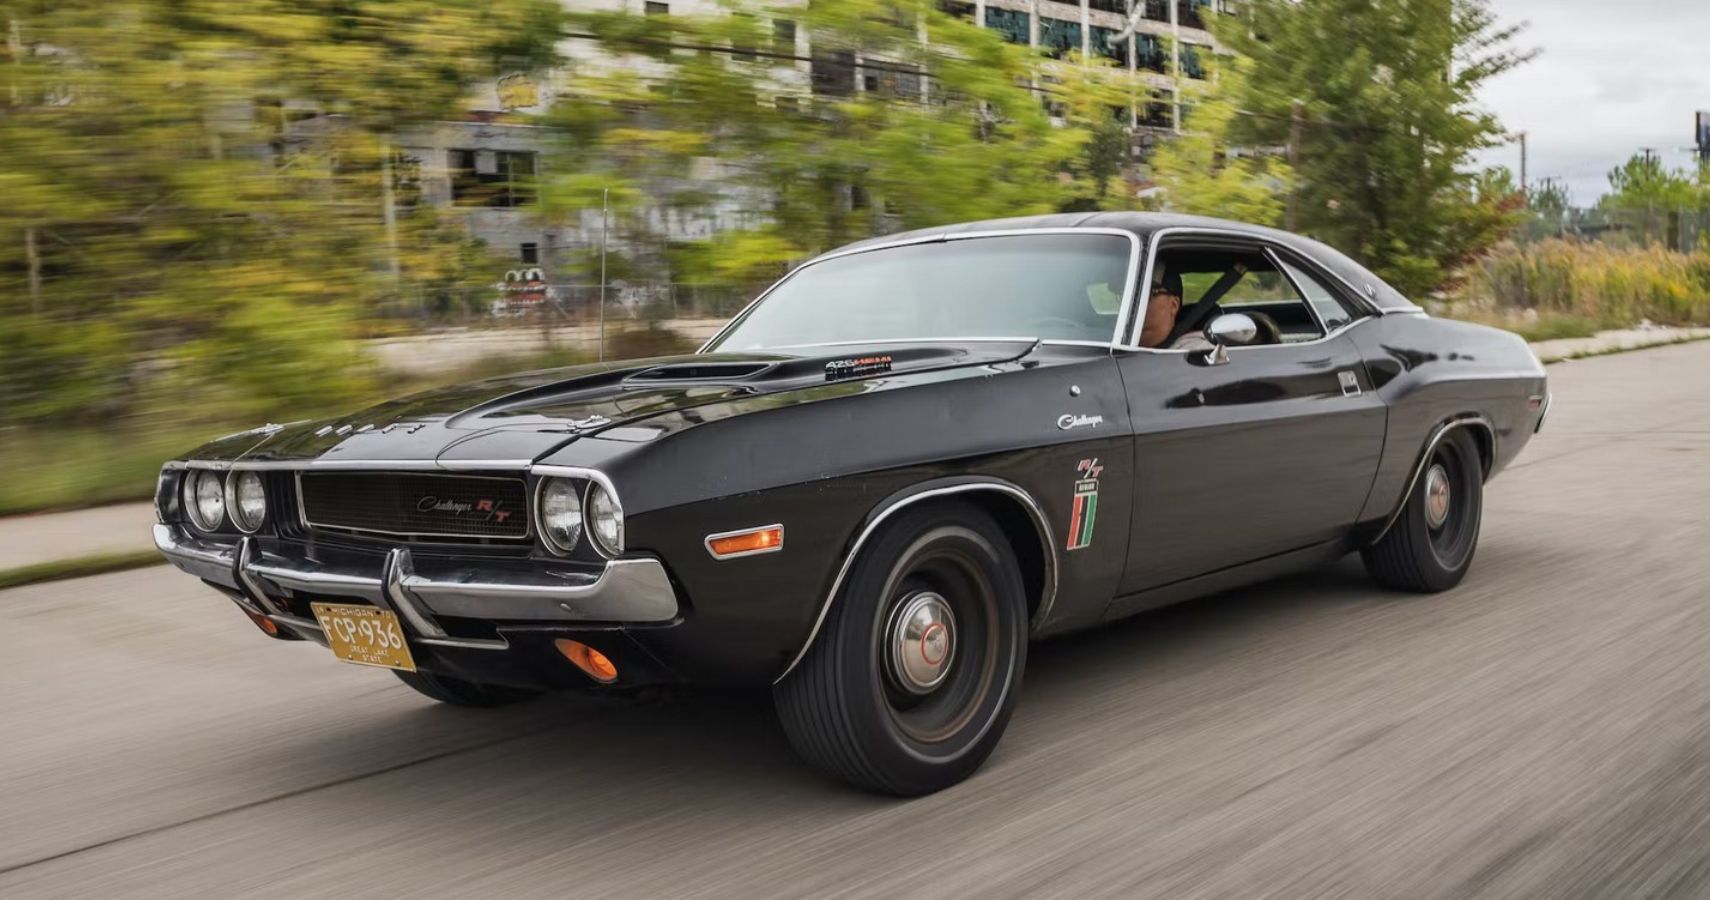 Classic Dodge Challenger And Detroit Legend 'Black Ghost' Is Going Up